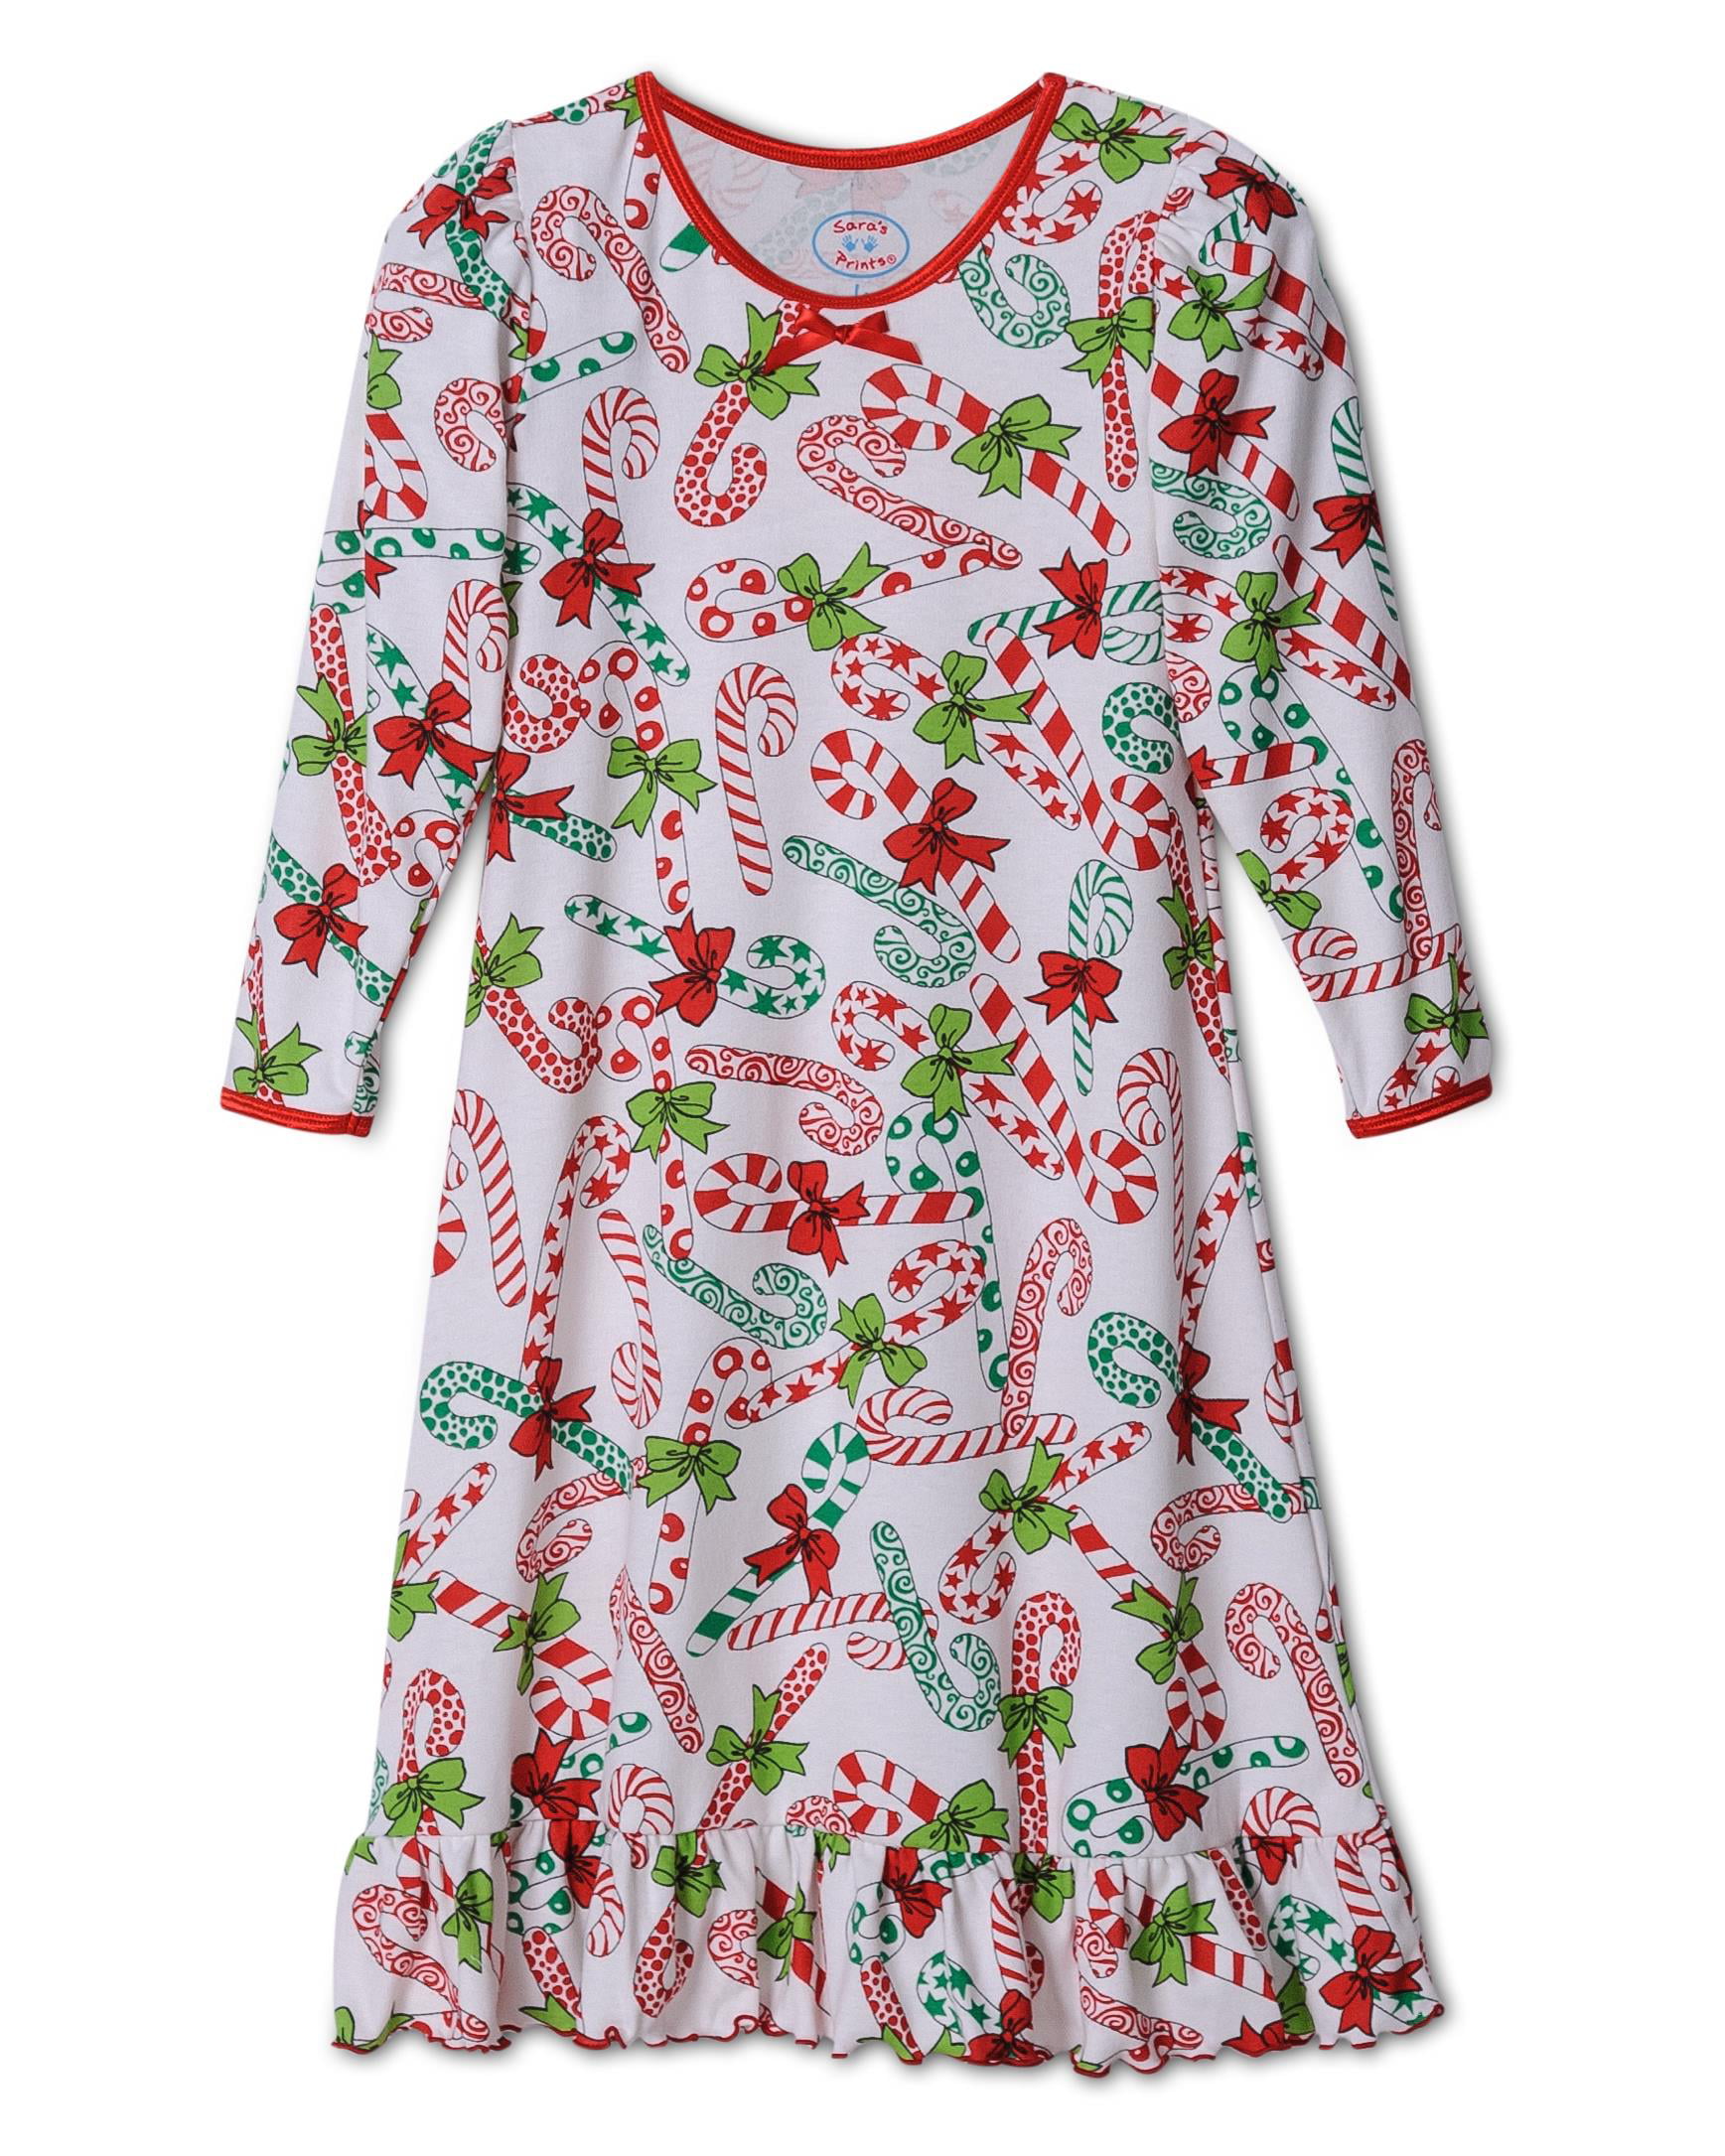 Candy Canes 4 Saras Prints Little Girls Puffed Sleeve Nightgown